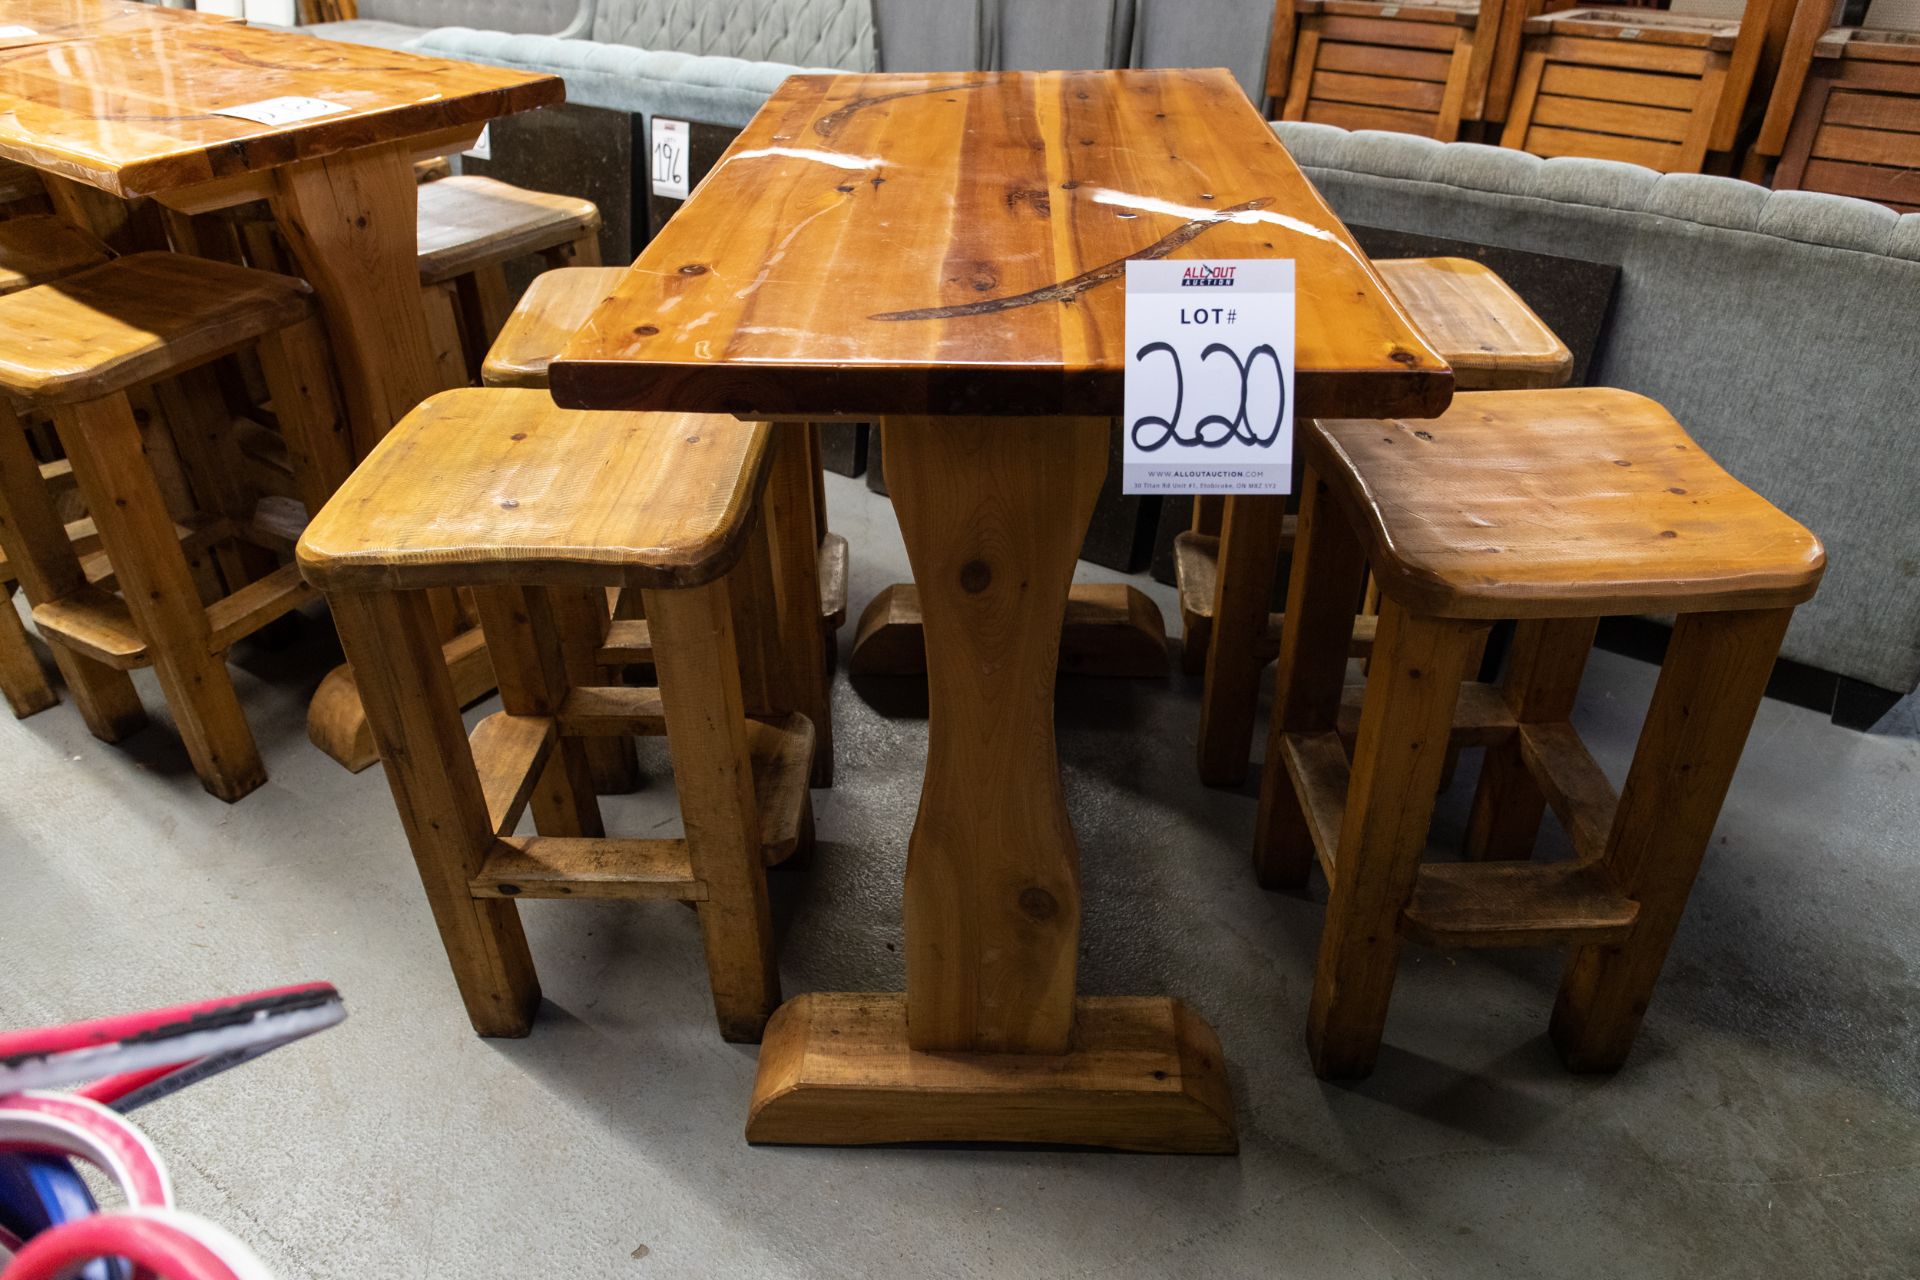 4' WHITE PINE HIGH TOP TABLE WITH 4 STOOLS H-42" W-28" L-48"